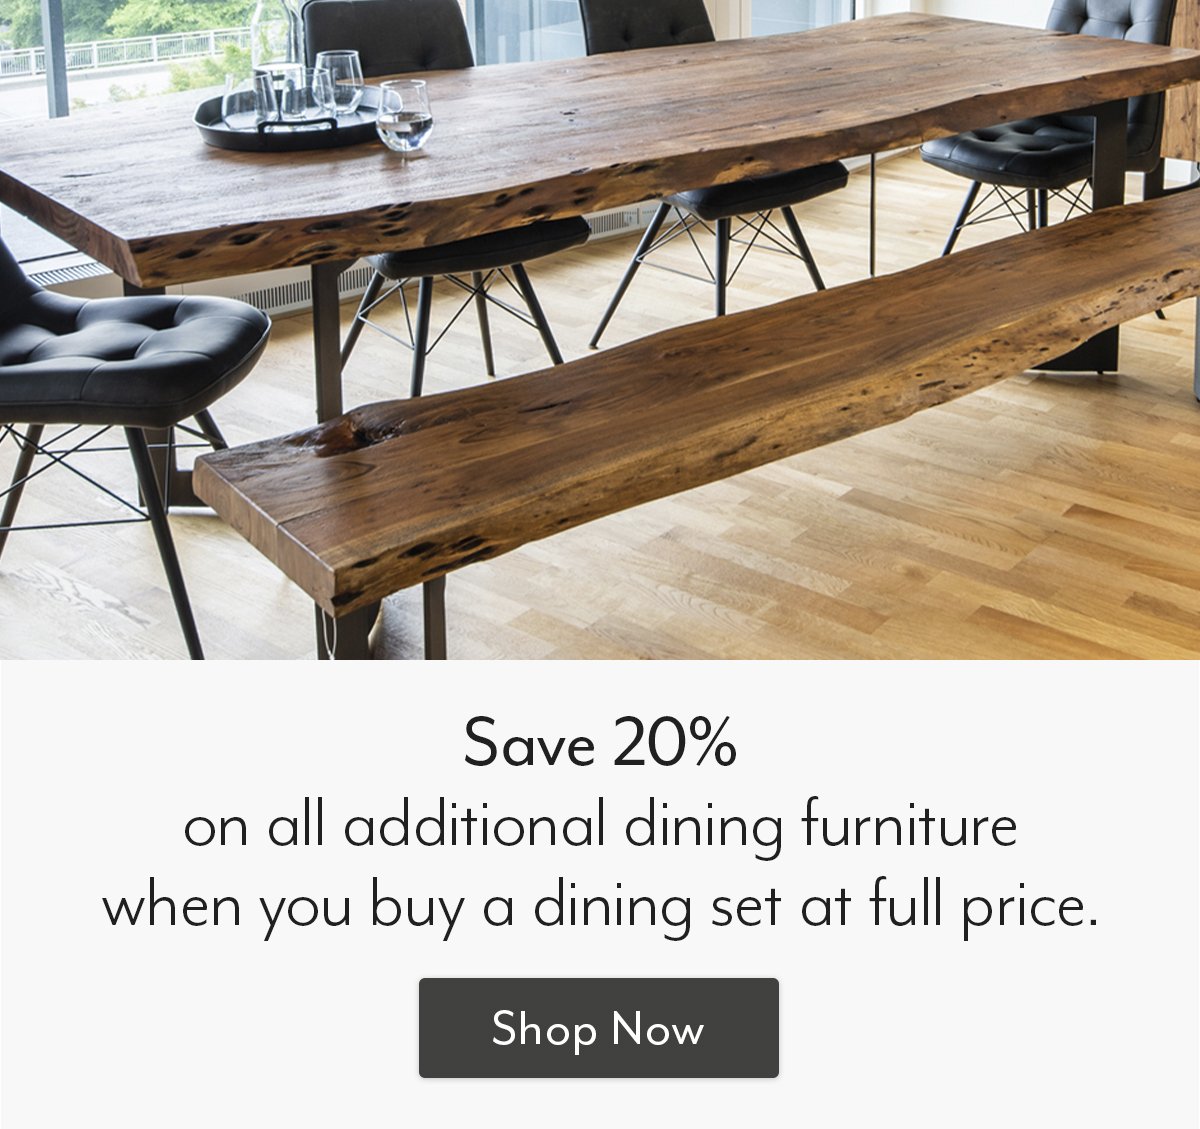 Save 20% on additional dining furniture when you buy a dining set at full price!